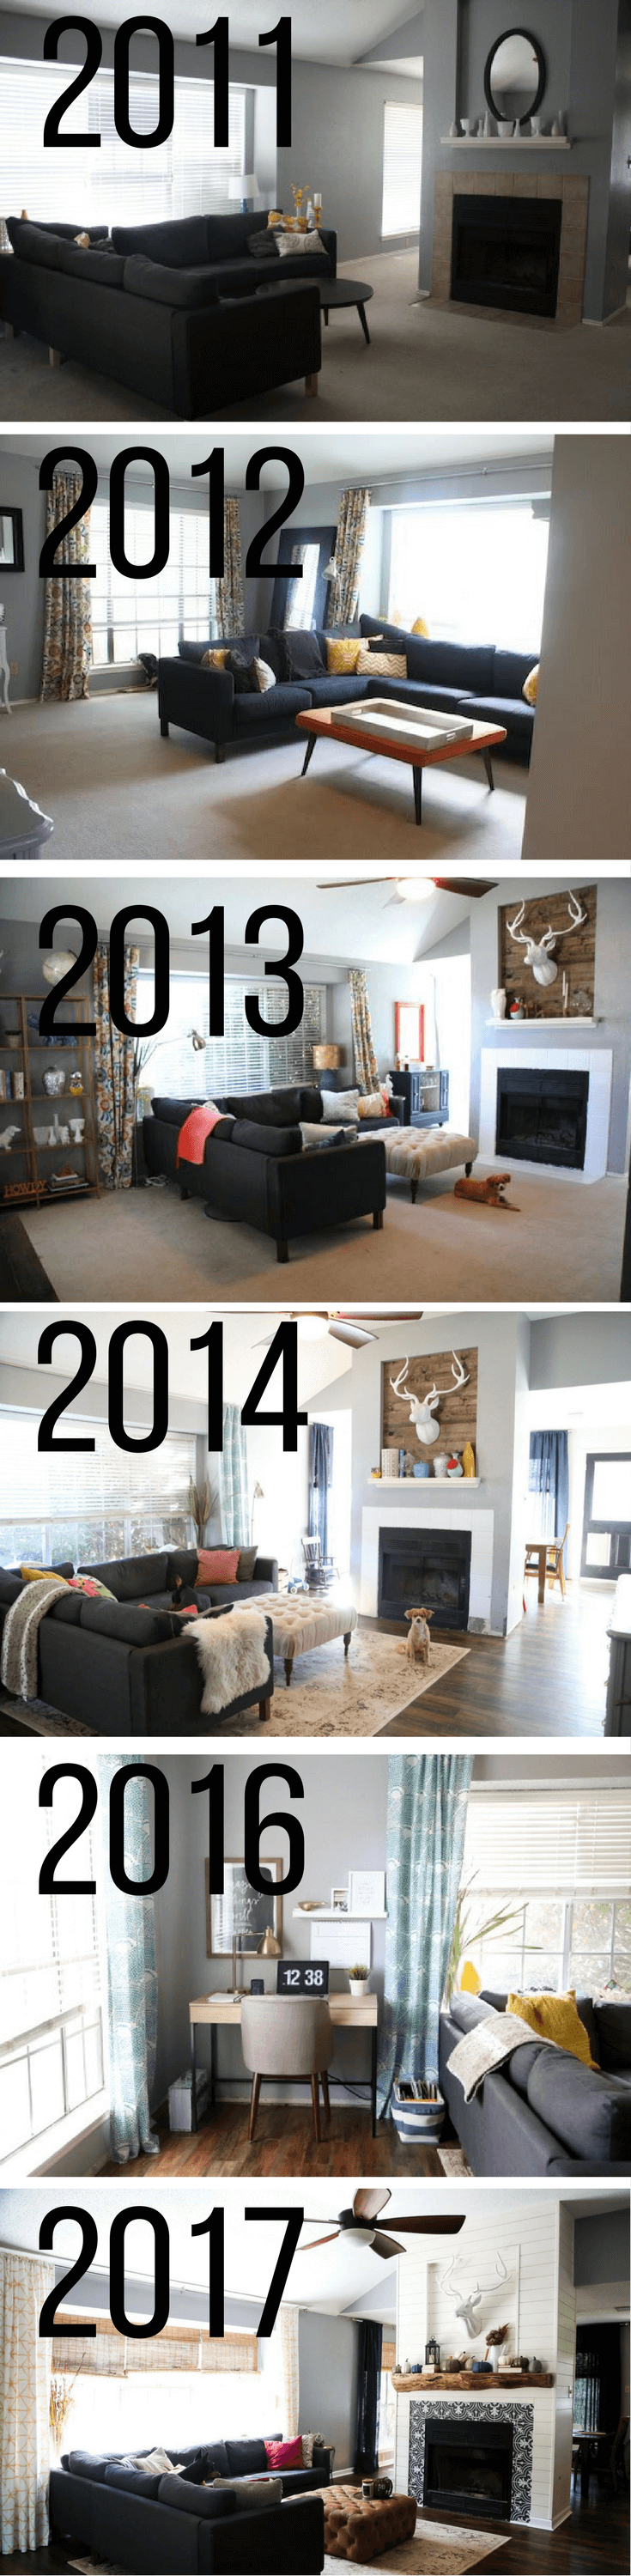 Before and after living room renovation - photos of a living room transformation